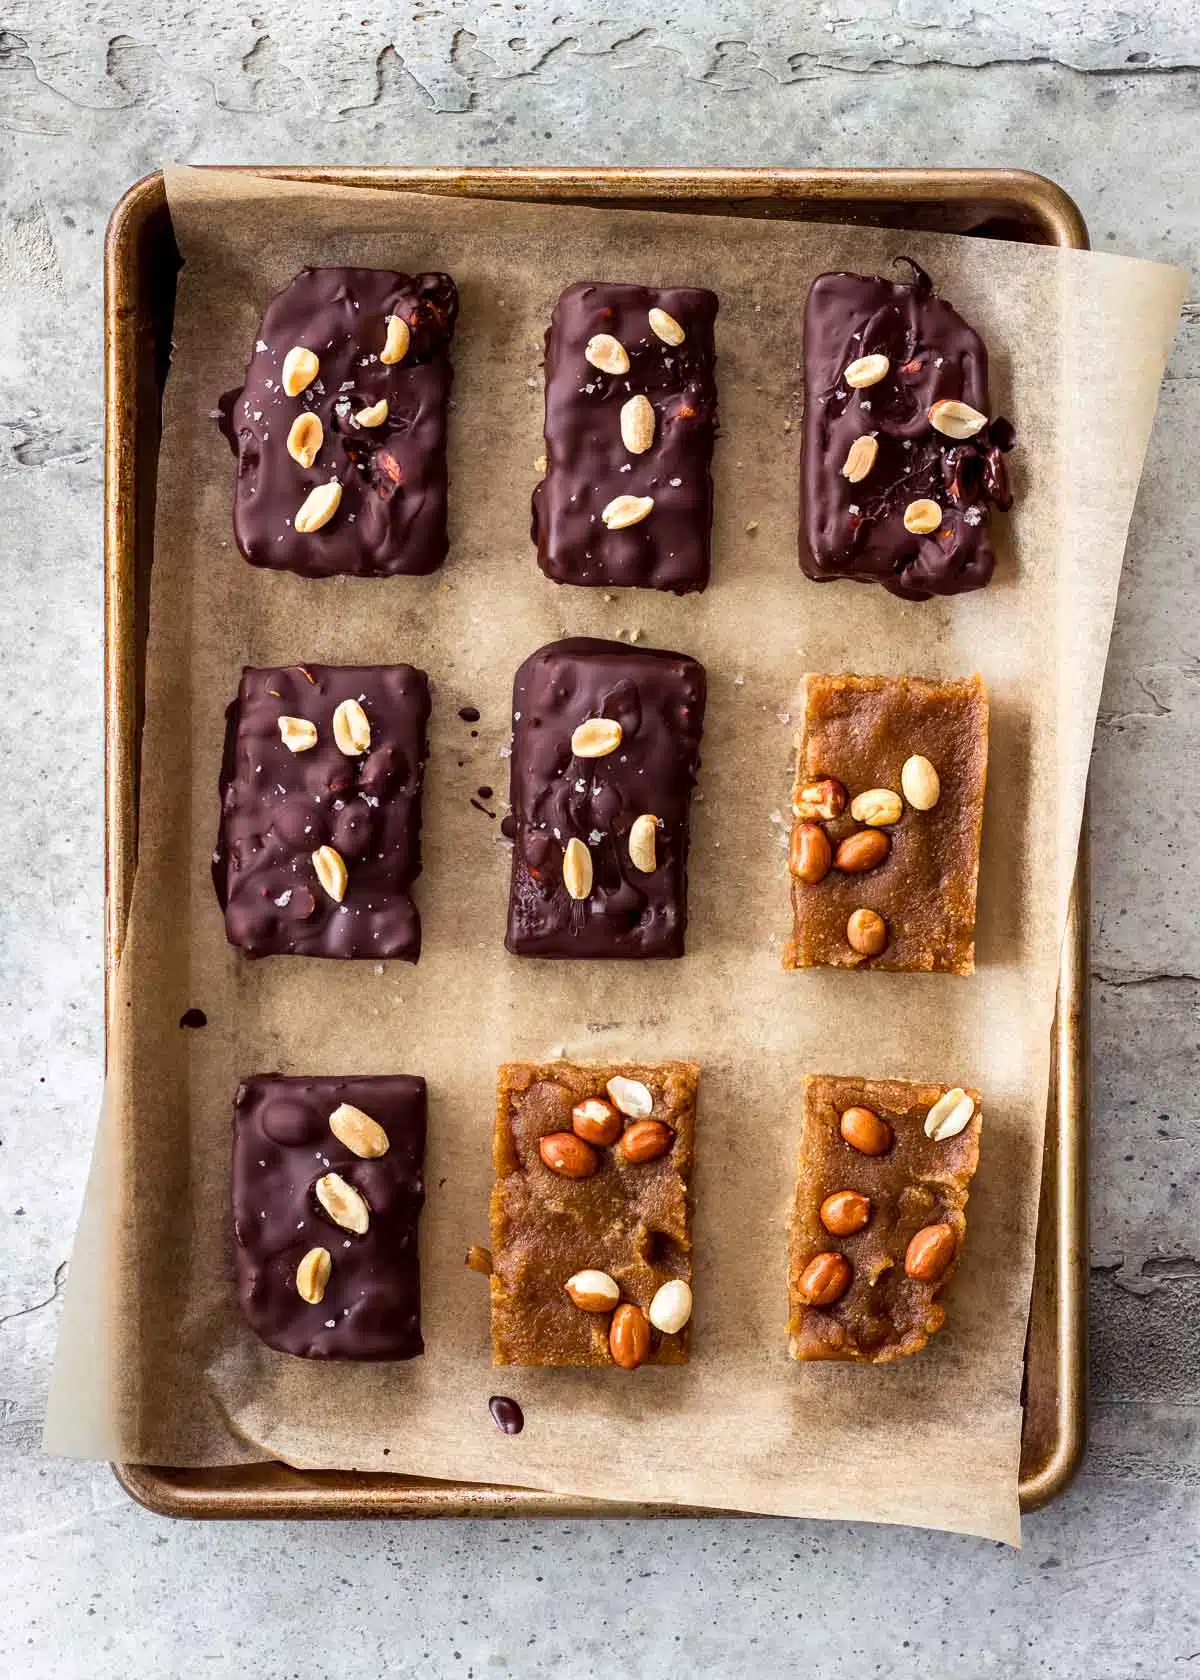 A parchment-lined baking sheet has vegan snickers bars spread over it. Some have already been covered in chocolate.